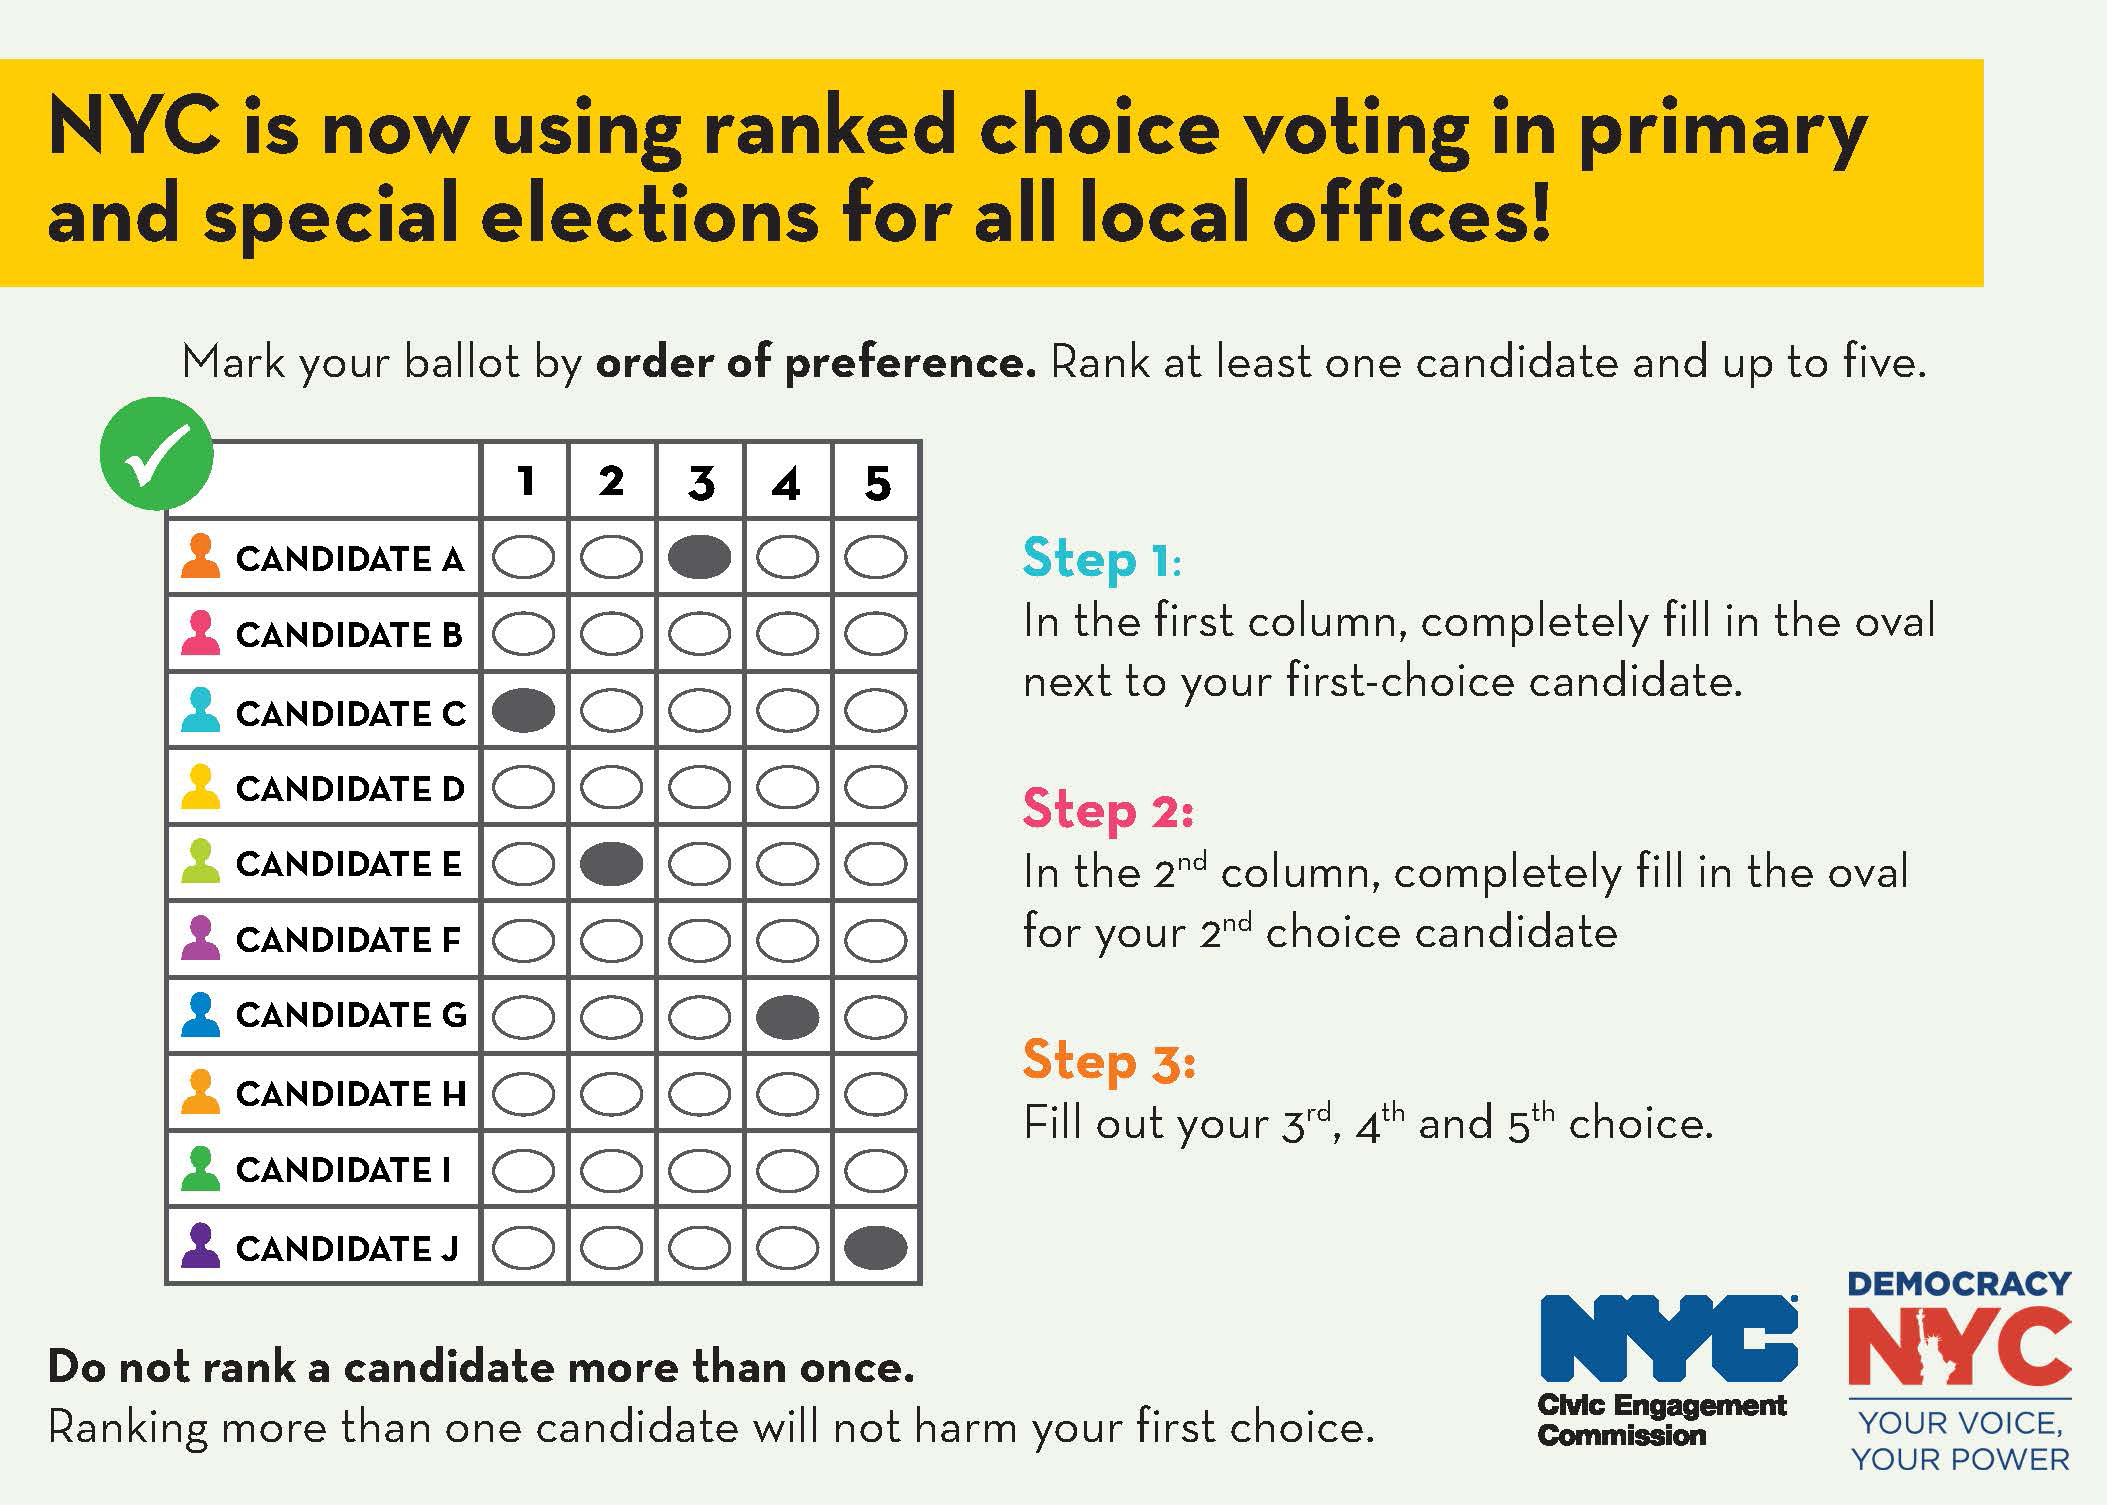 ranked choice voting ballot reading NYC is now using ranked choice voting in primary and special elections for all local offices! Text reads: Mark your ballot by order of preference. 1: first column fill in oval next to first-choice candidate. 2: in the 2nd column fill in oval for 2nd choice candidate. 3: Fill out your 3rd, 4th, and 5th choice. Don’t rank a candidate more than once. Ranking more than one candidate will not harm your first choice. ranked choice voting ballot.